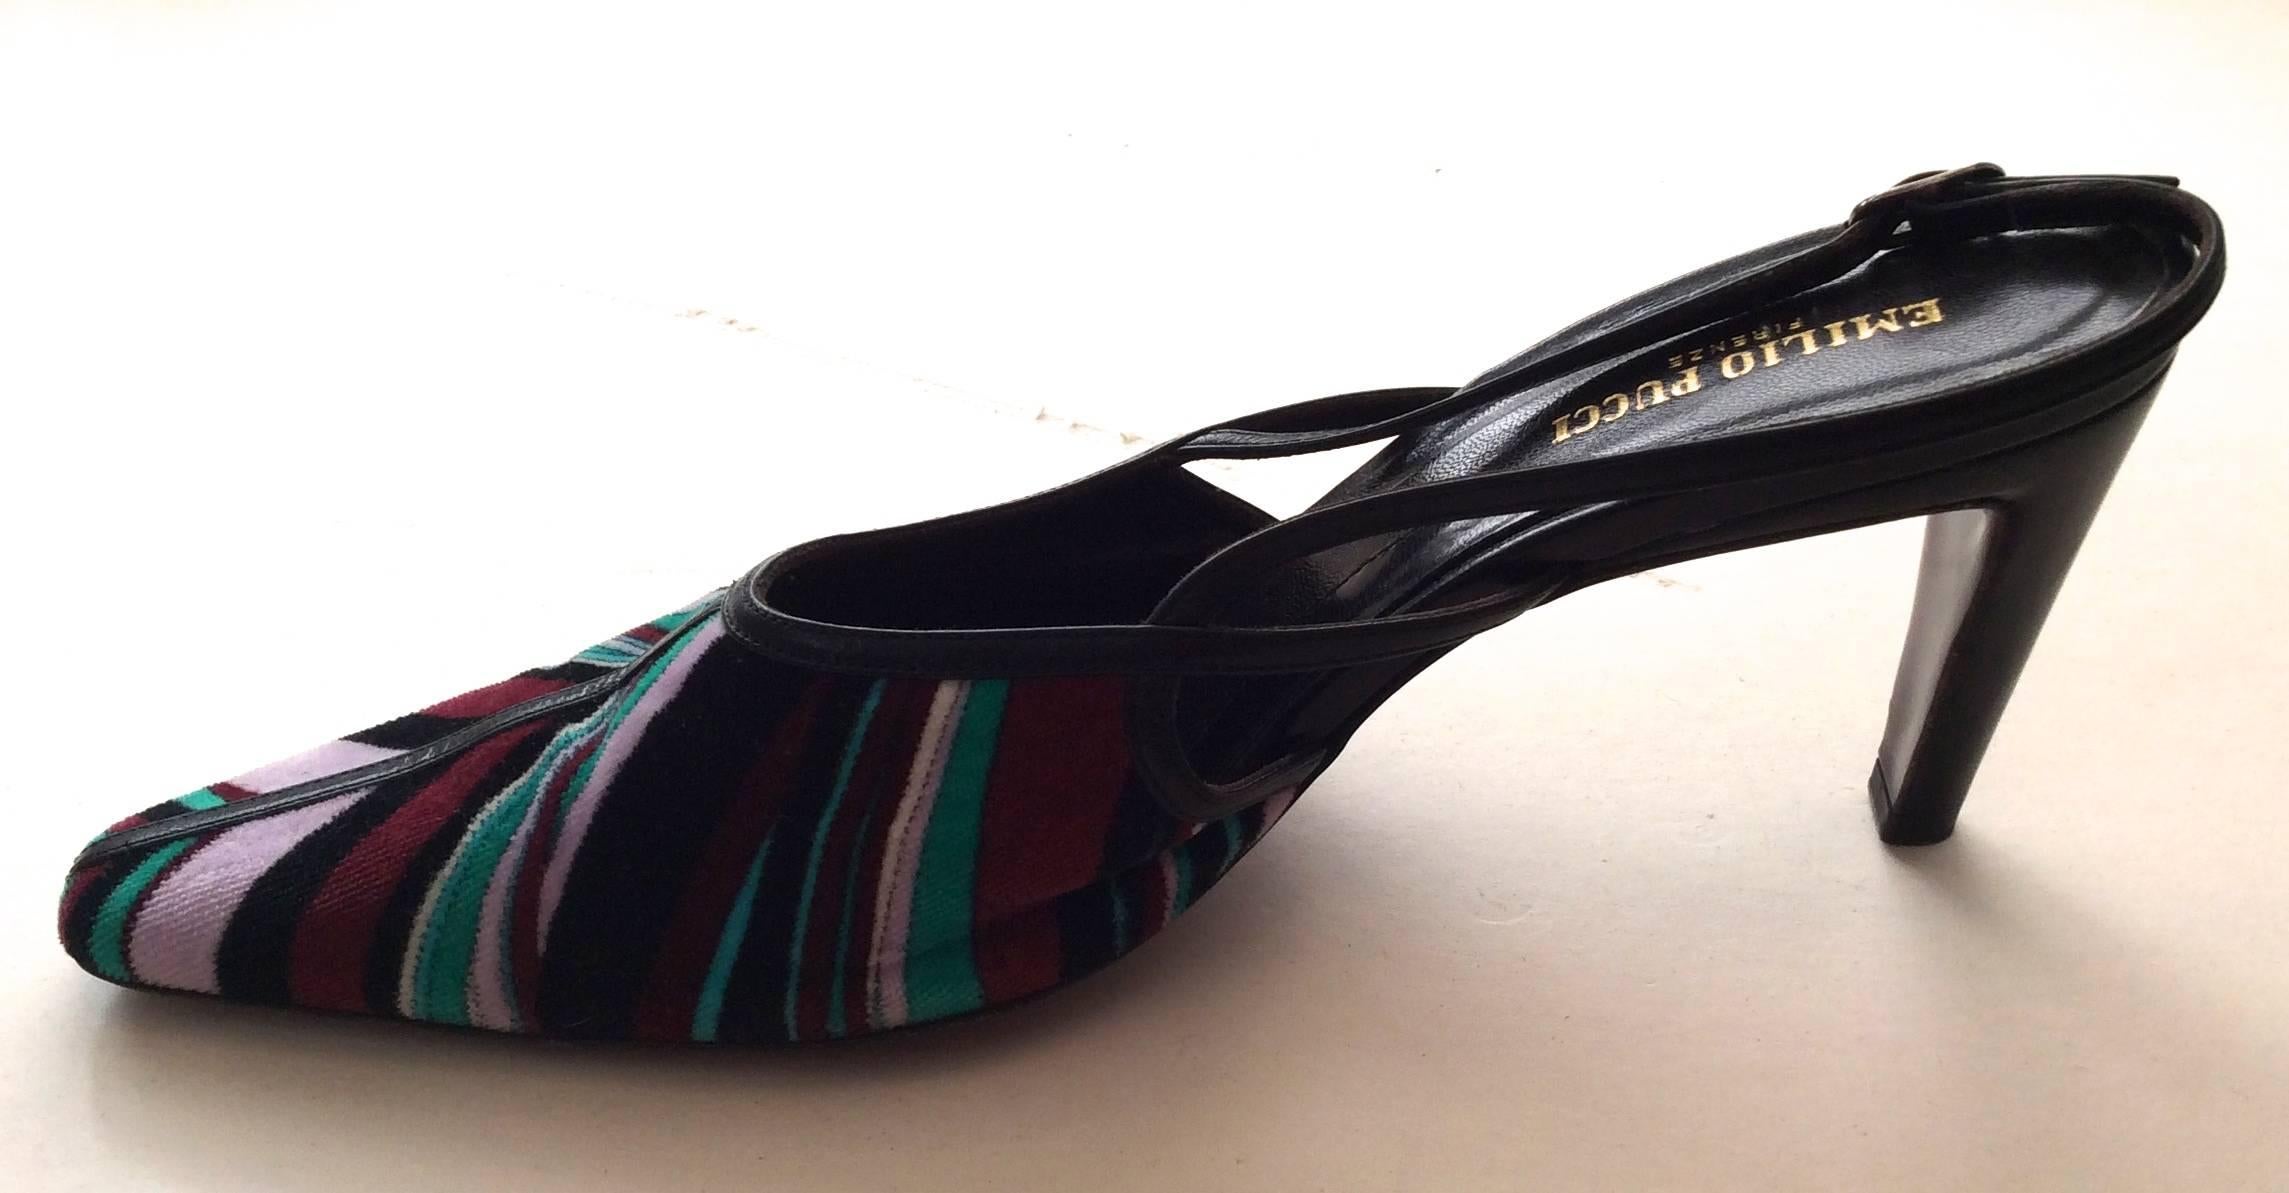 Emilio Pucci Slingback pumps. Size 37. Magnificent slingback style pumps that have a velvet fabric on the exterior with a definitively Emilio Pucci design on the exterior of the shoe. There is a black leather on the rest of the shoe. A remarkable